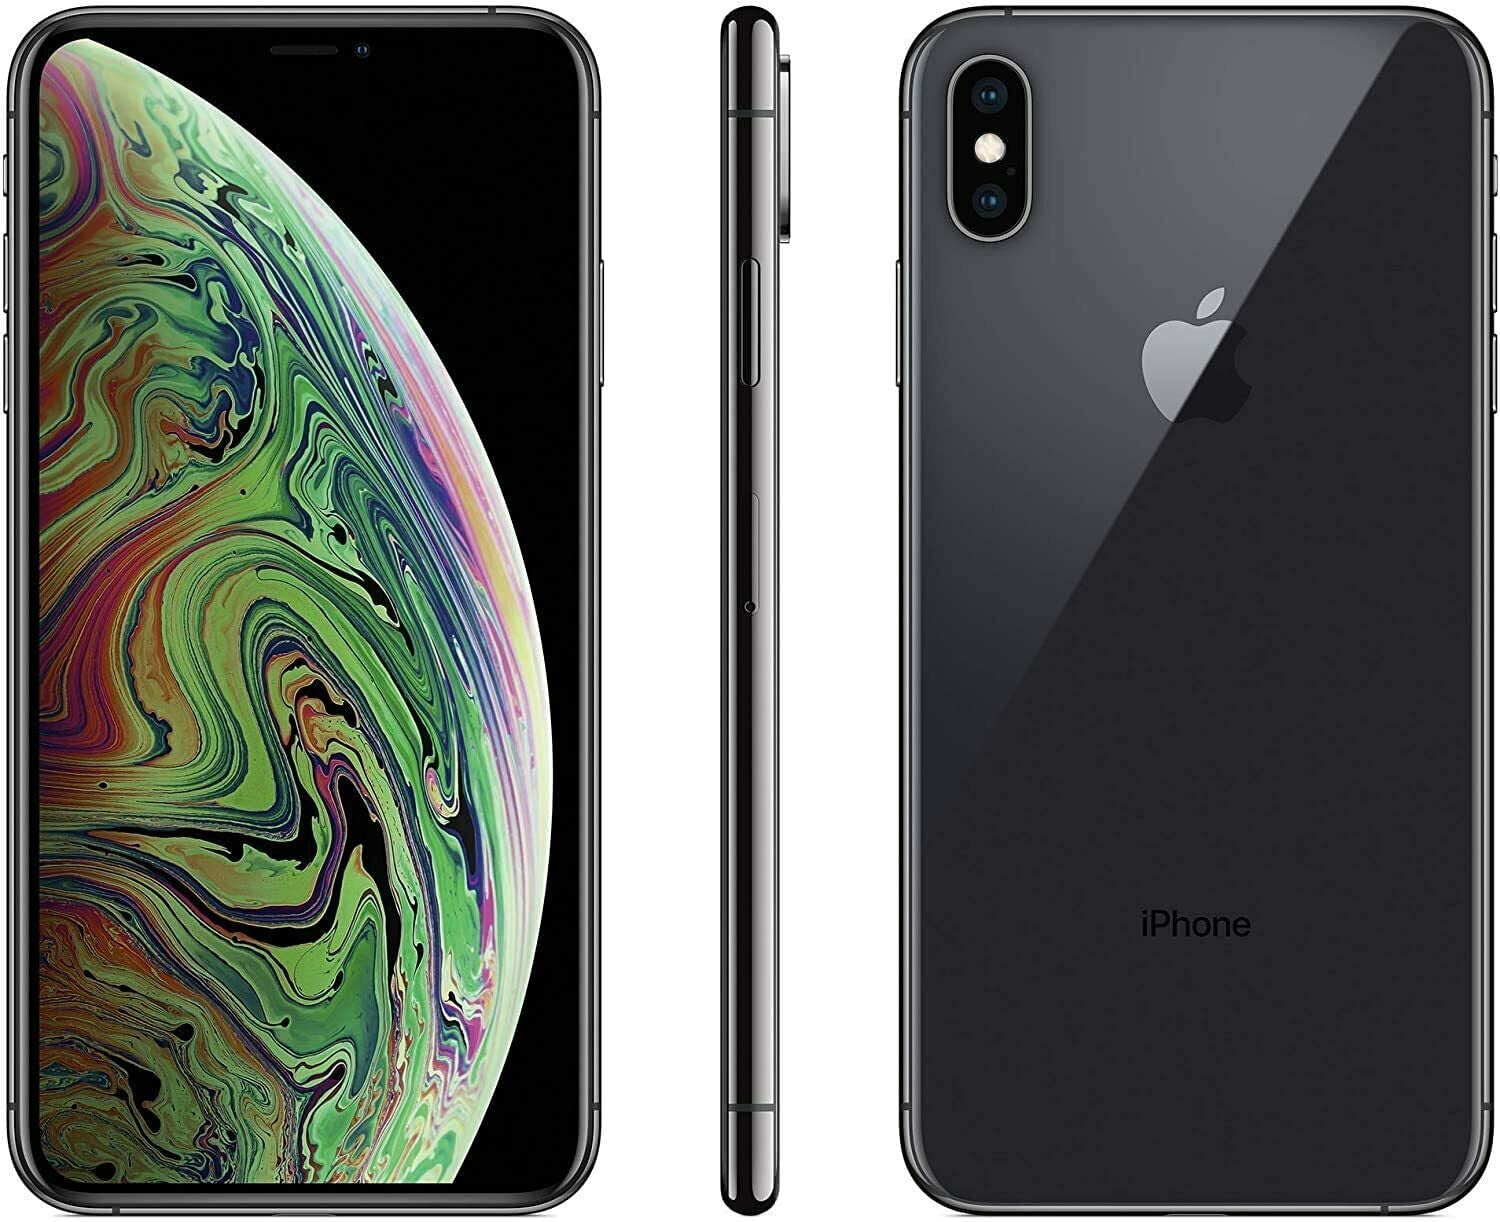 Apple iPhone XS Max, 64GB, Space Gray - Fully Unlocked